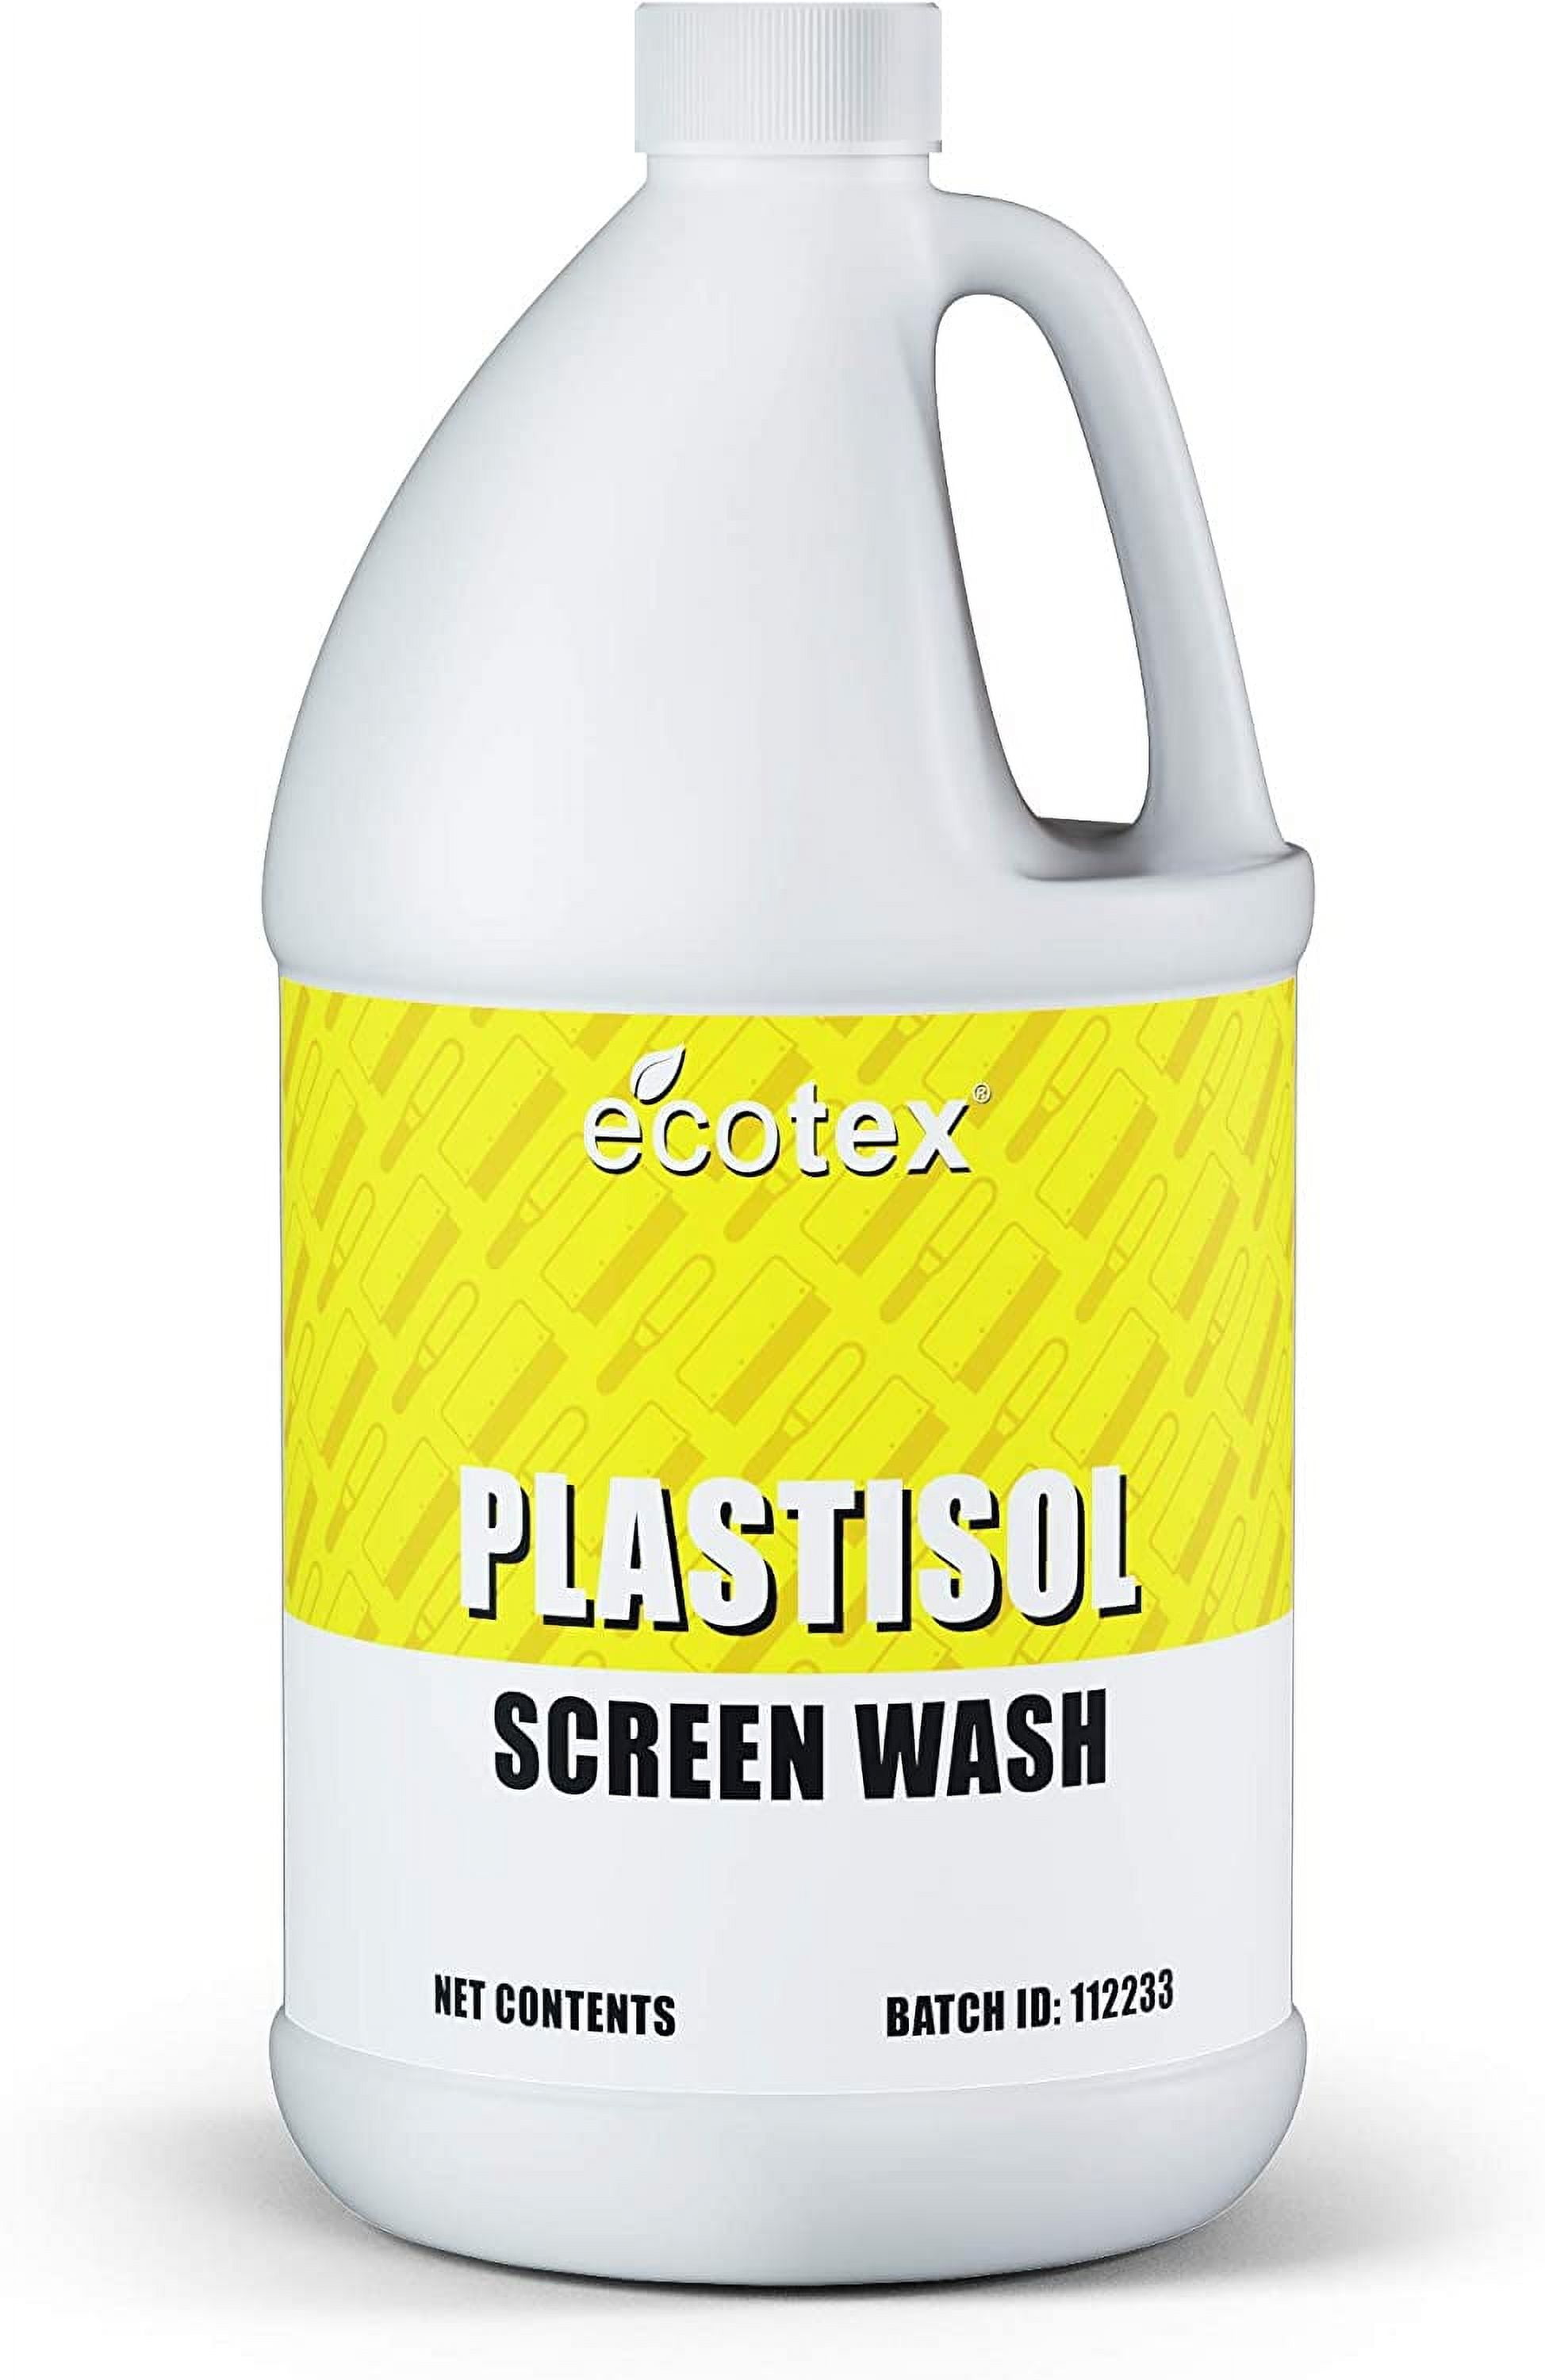 Ecotex Plastisol Screen Wash (Gallon-128oz) For Use in Sink and on